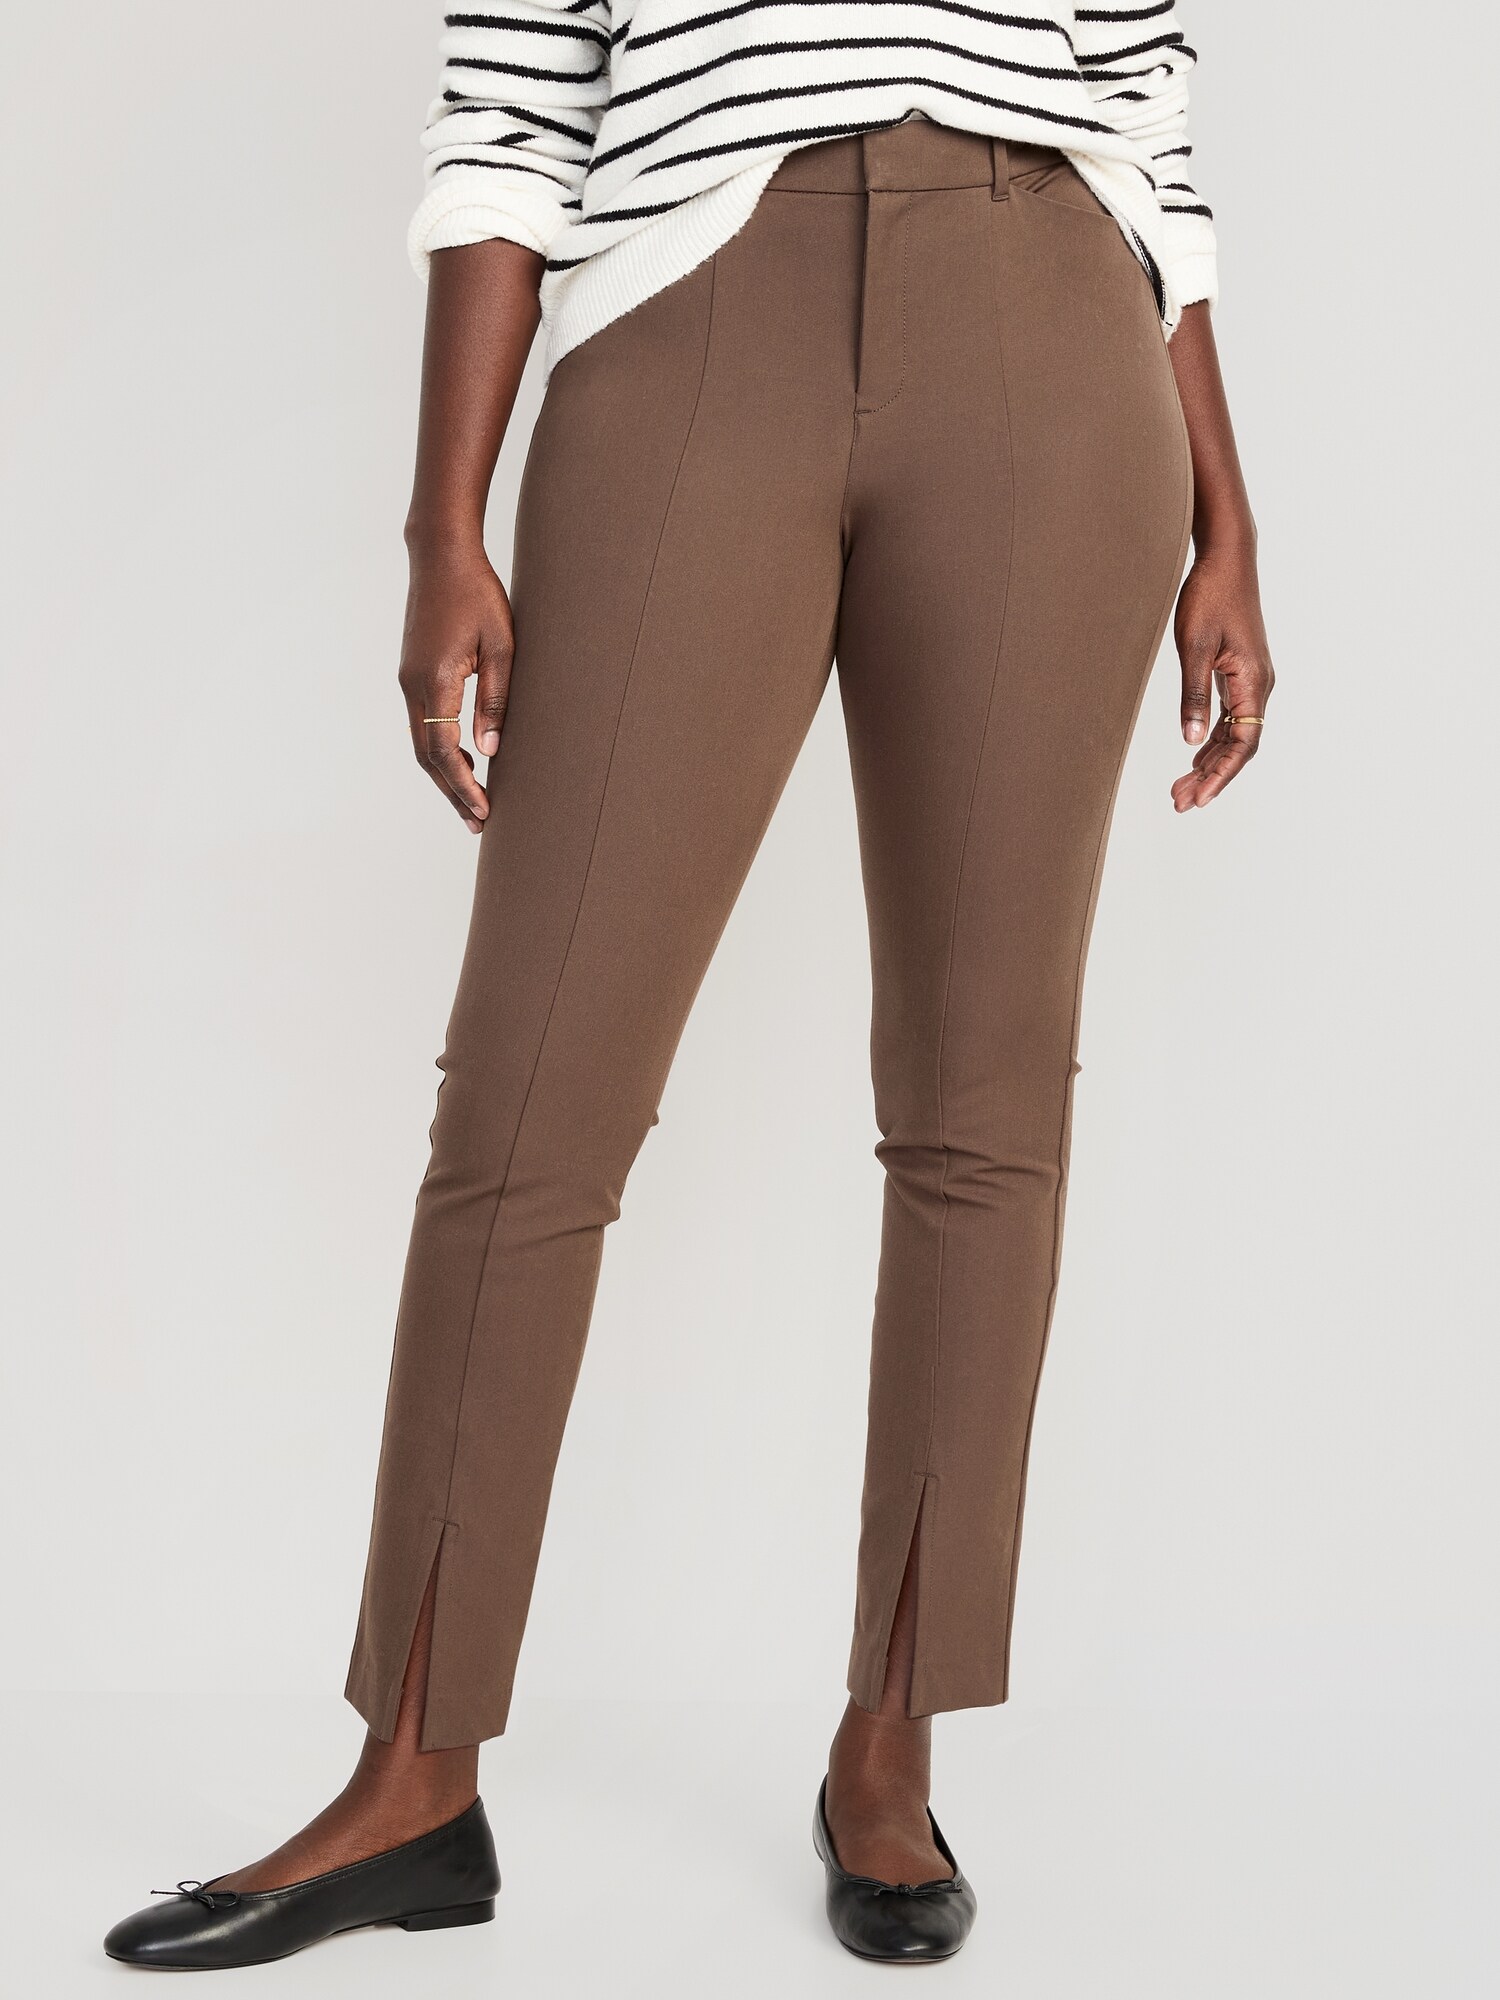 High-Waisted Split-Front Pixie Skinny Pants for Women | Old Navy